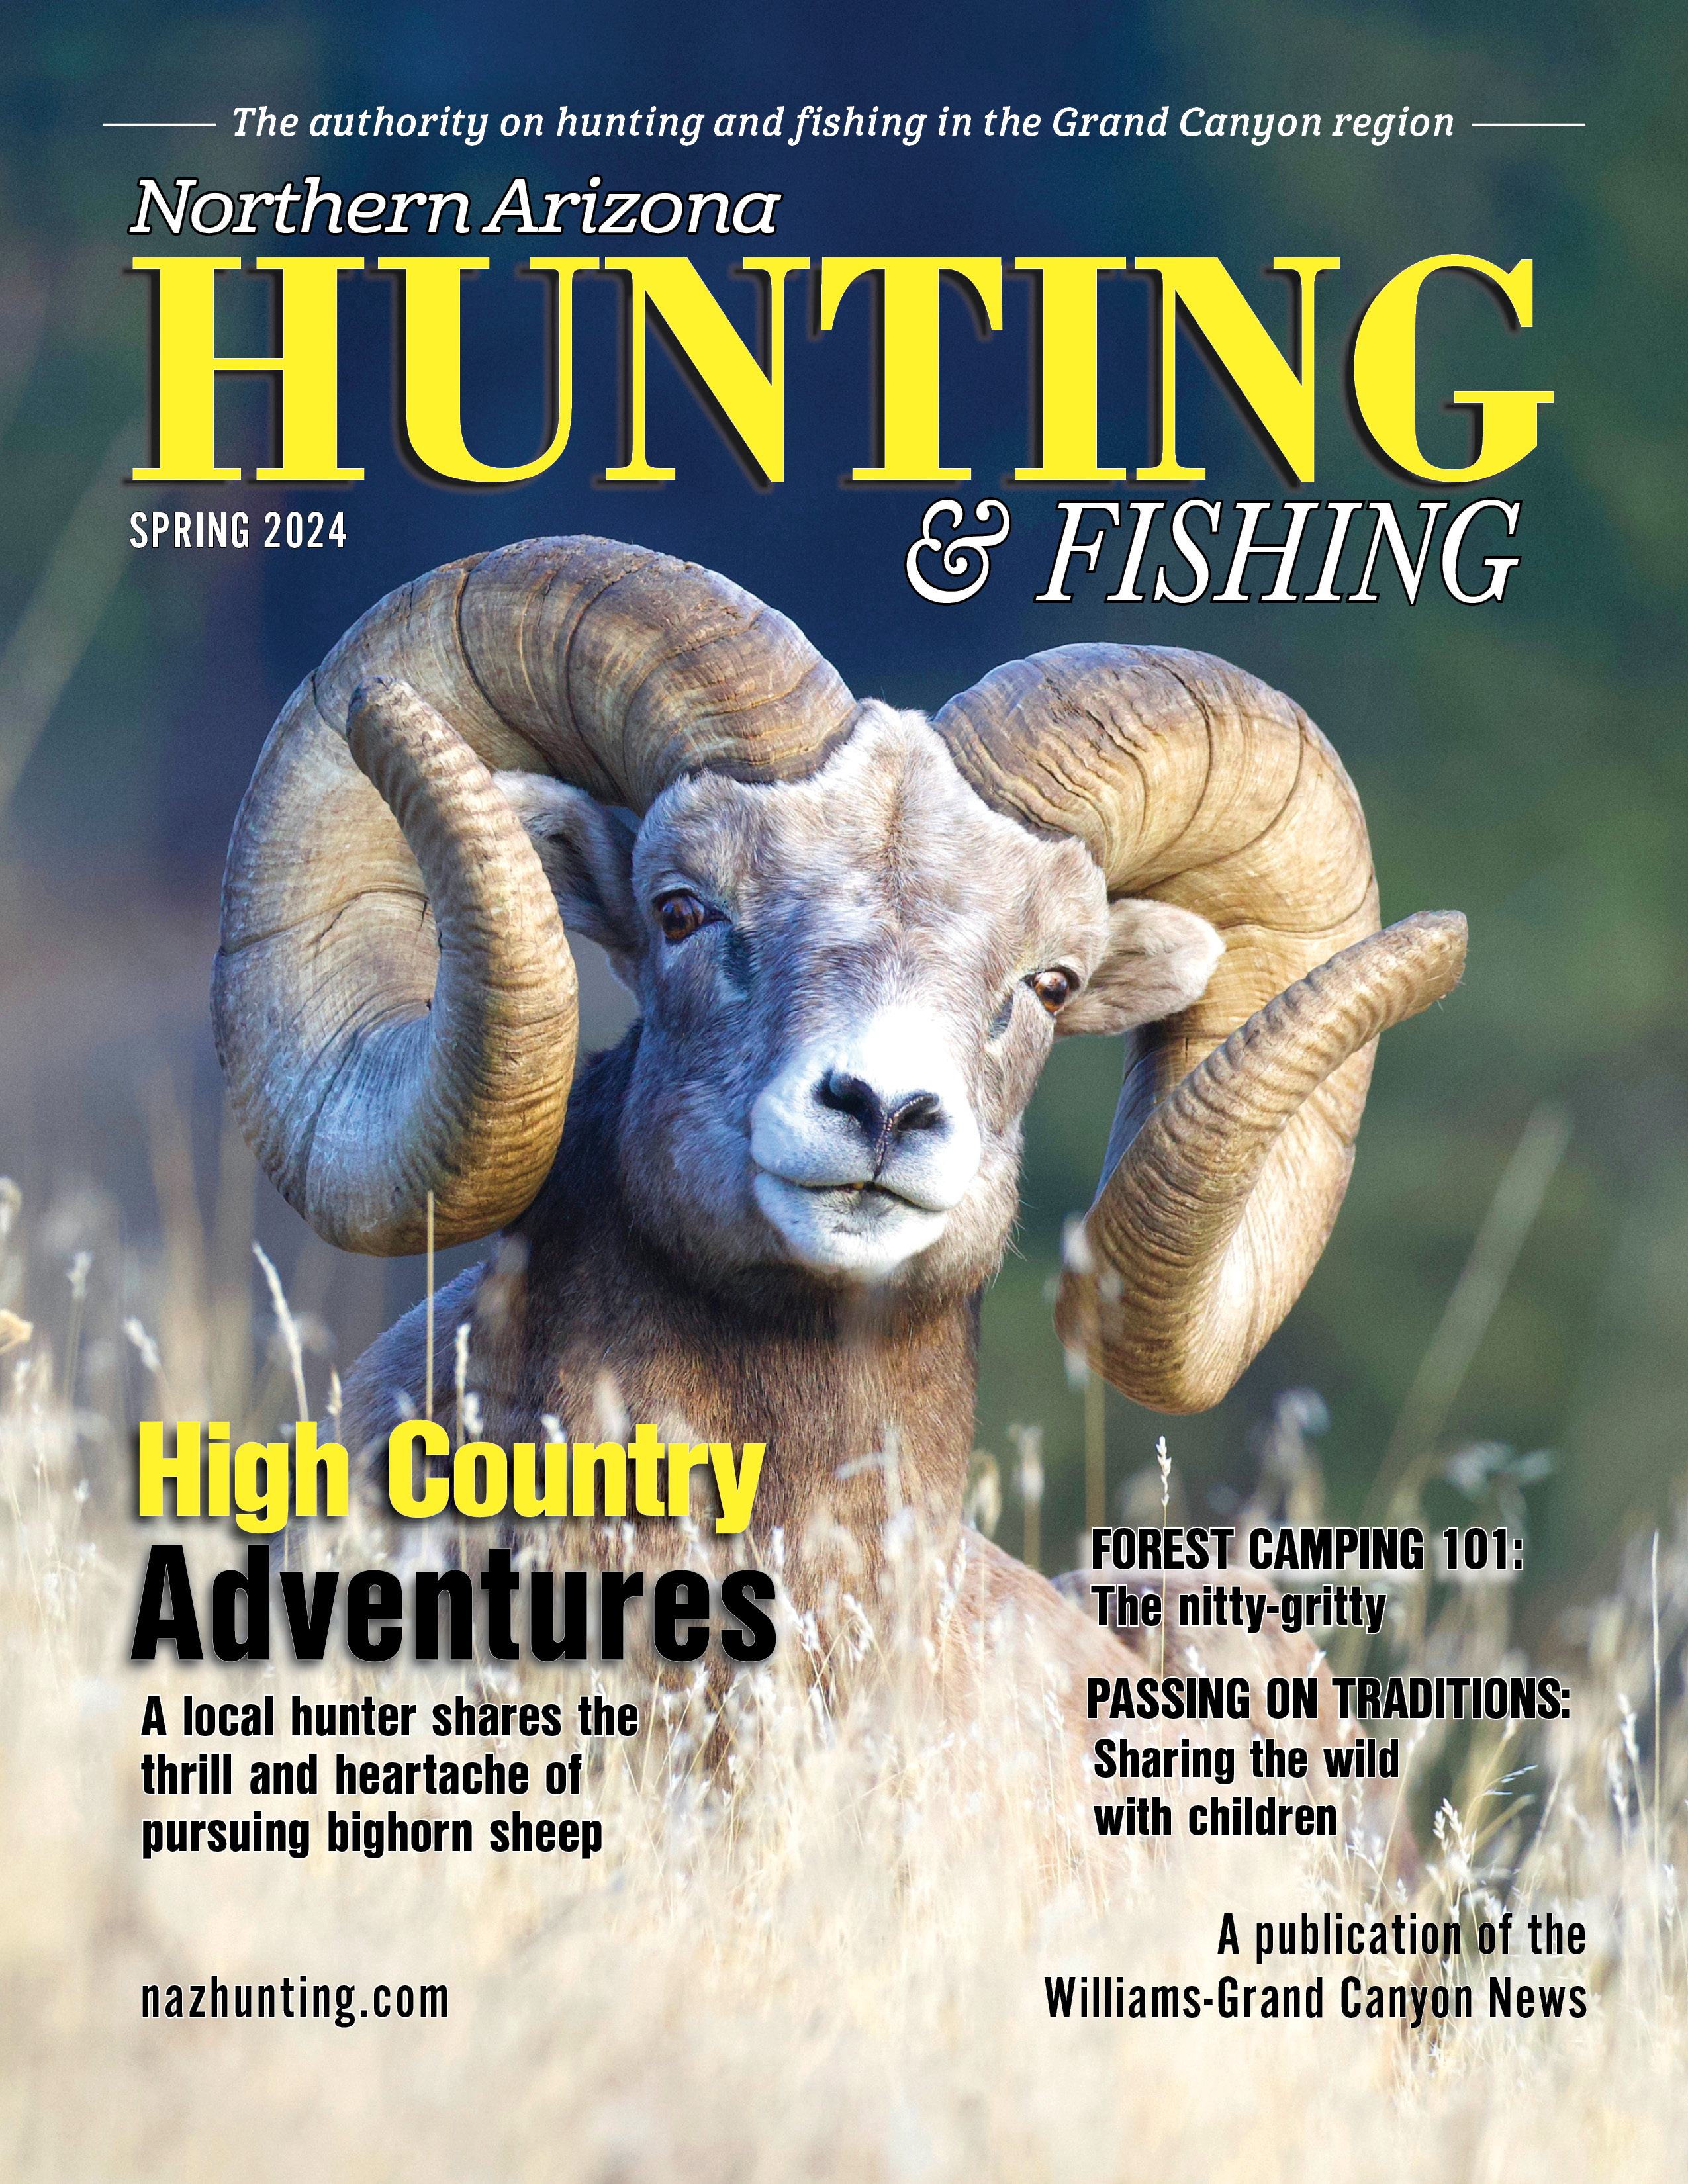 Northern Arizona Hunting & Fishing magazine Spring 2024 is in stands today, Williams-Grand Canyon News